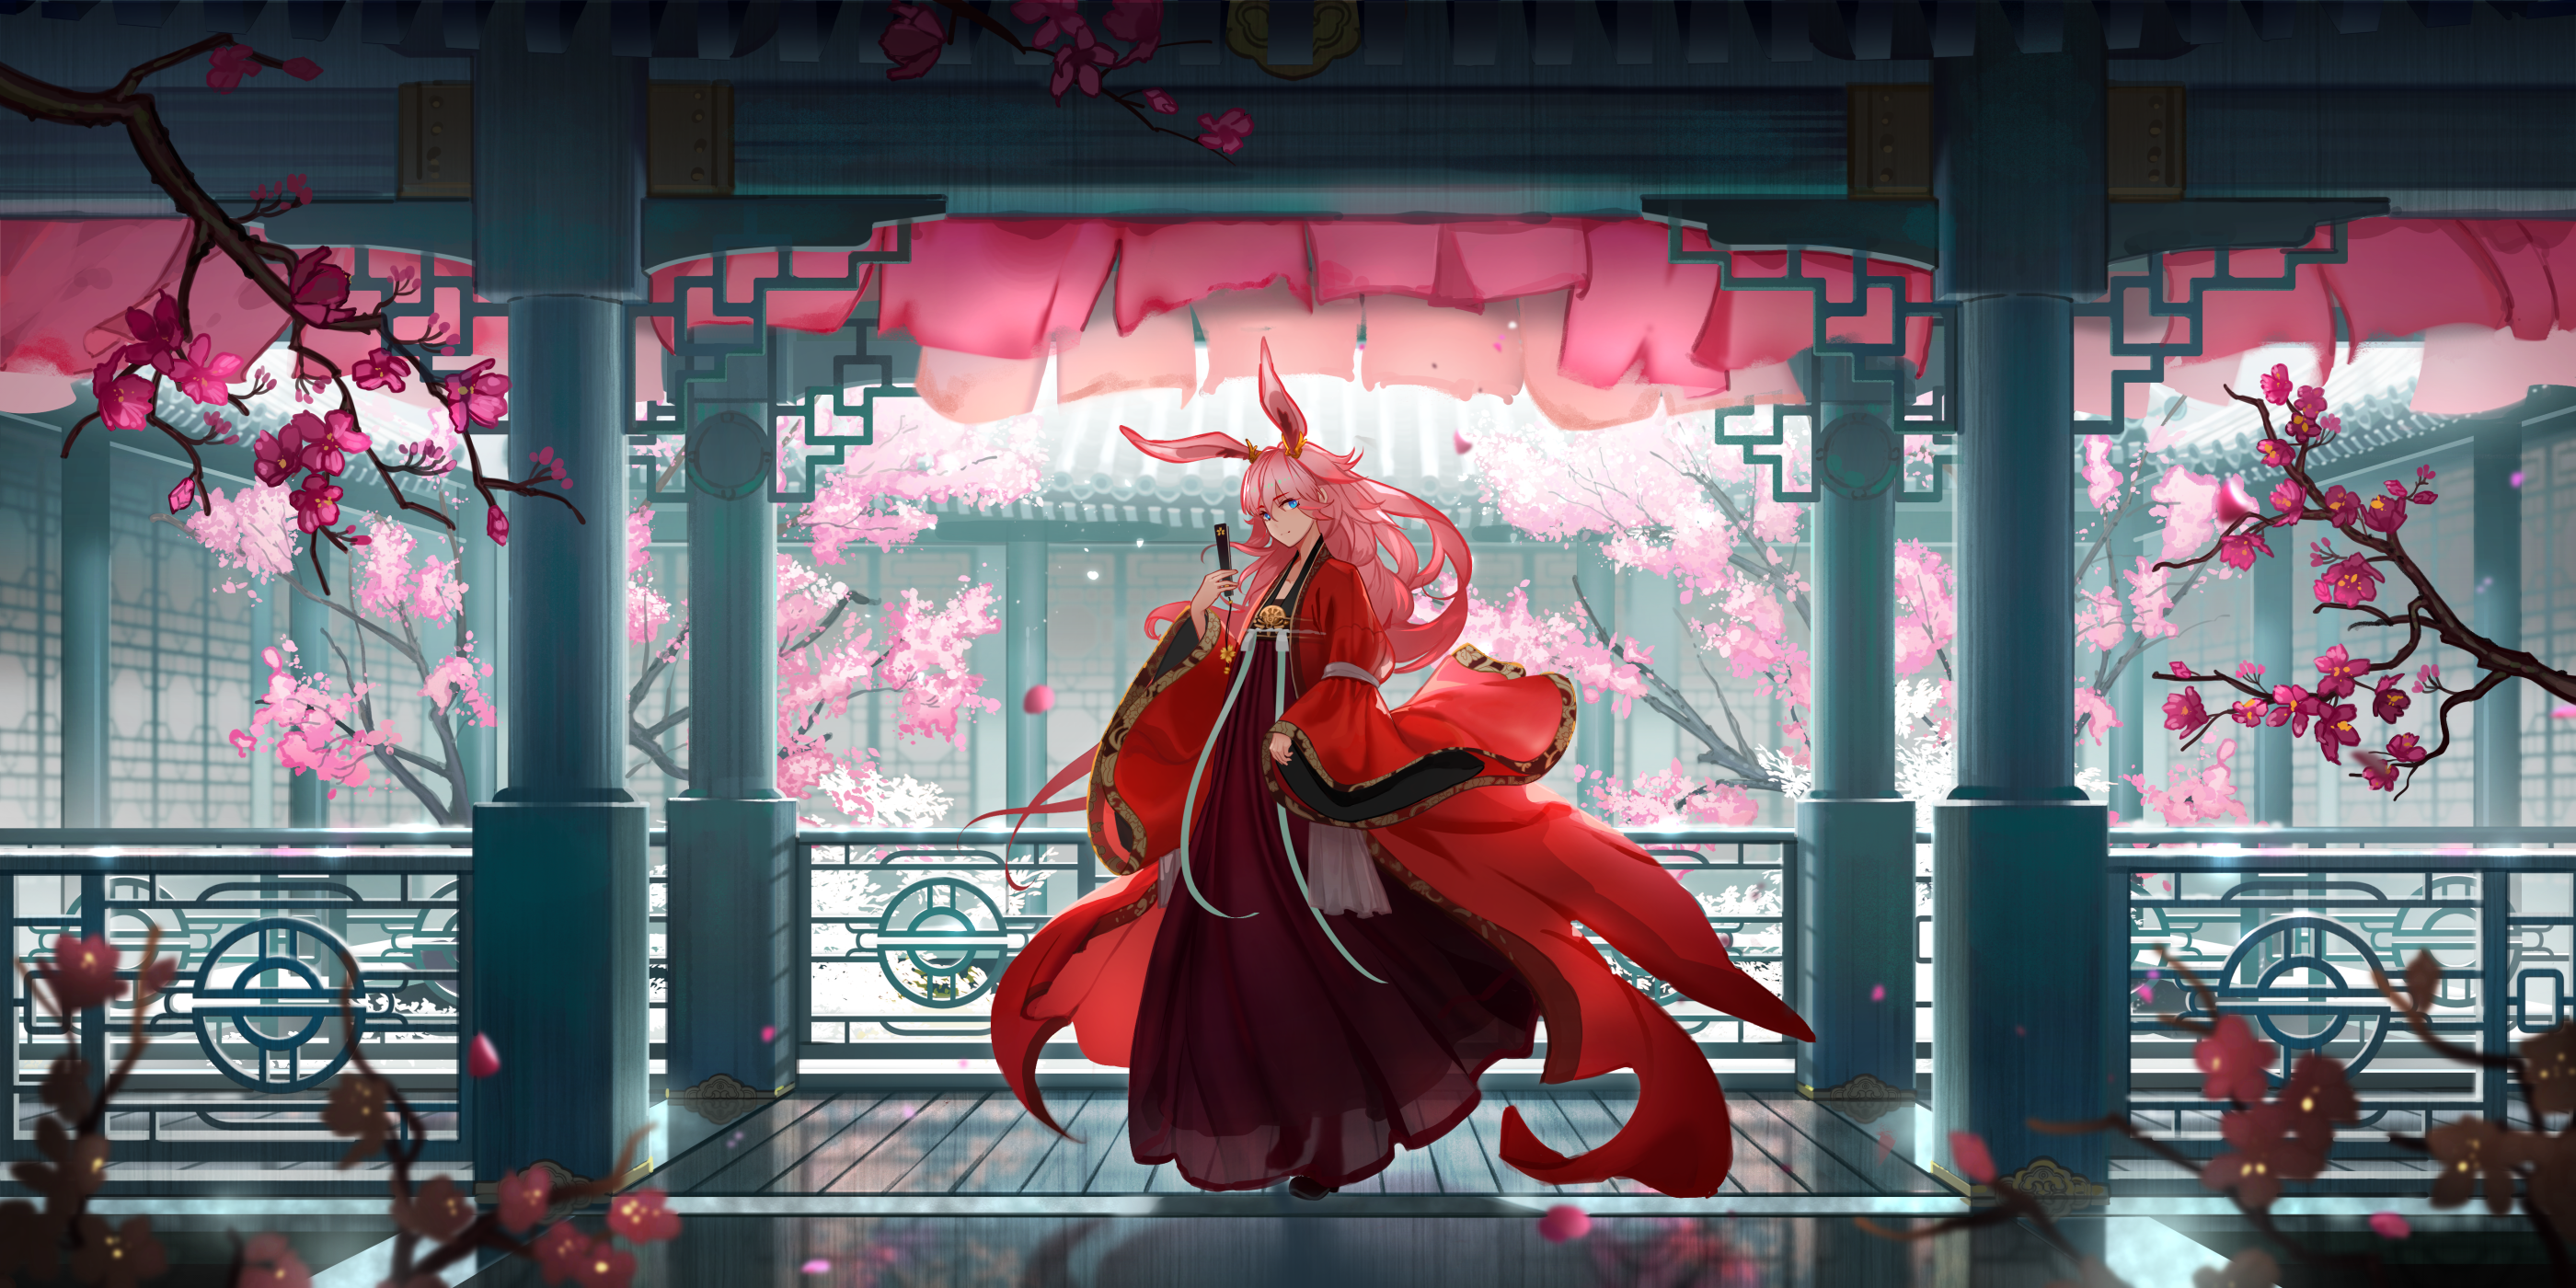 Anime 2800x1400 anime anime girls fantasy girl looking at viewer drawing digital art Asian architecture kimono cherry blossom